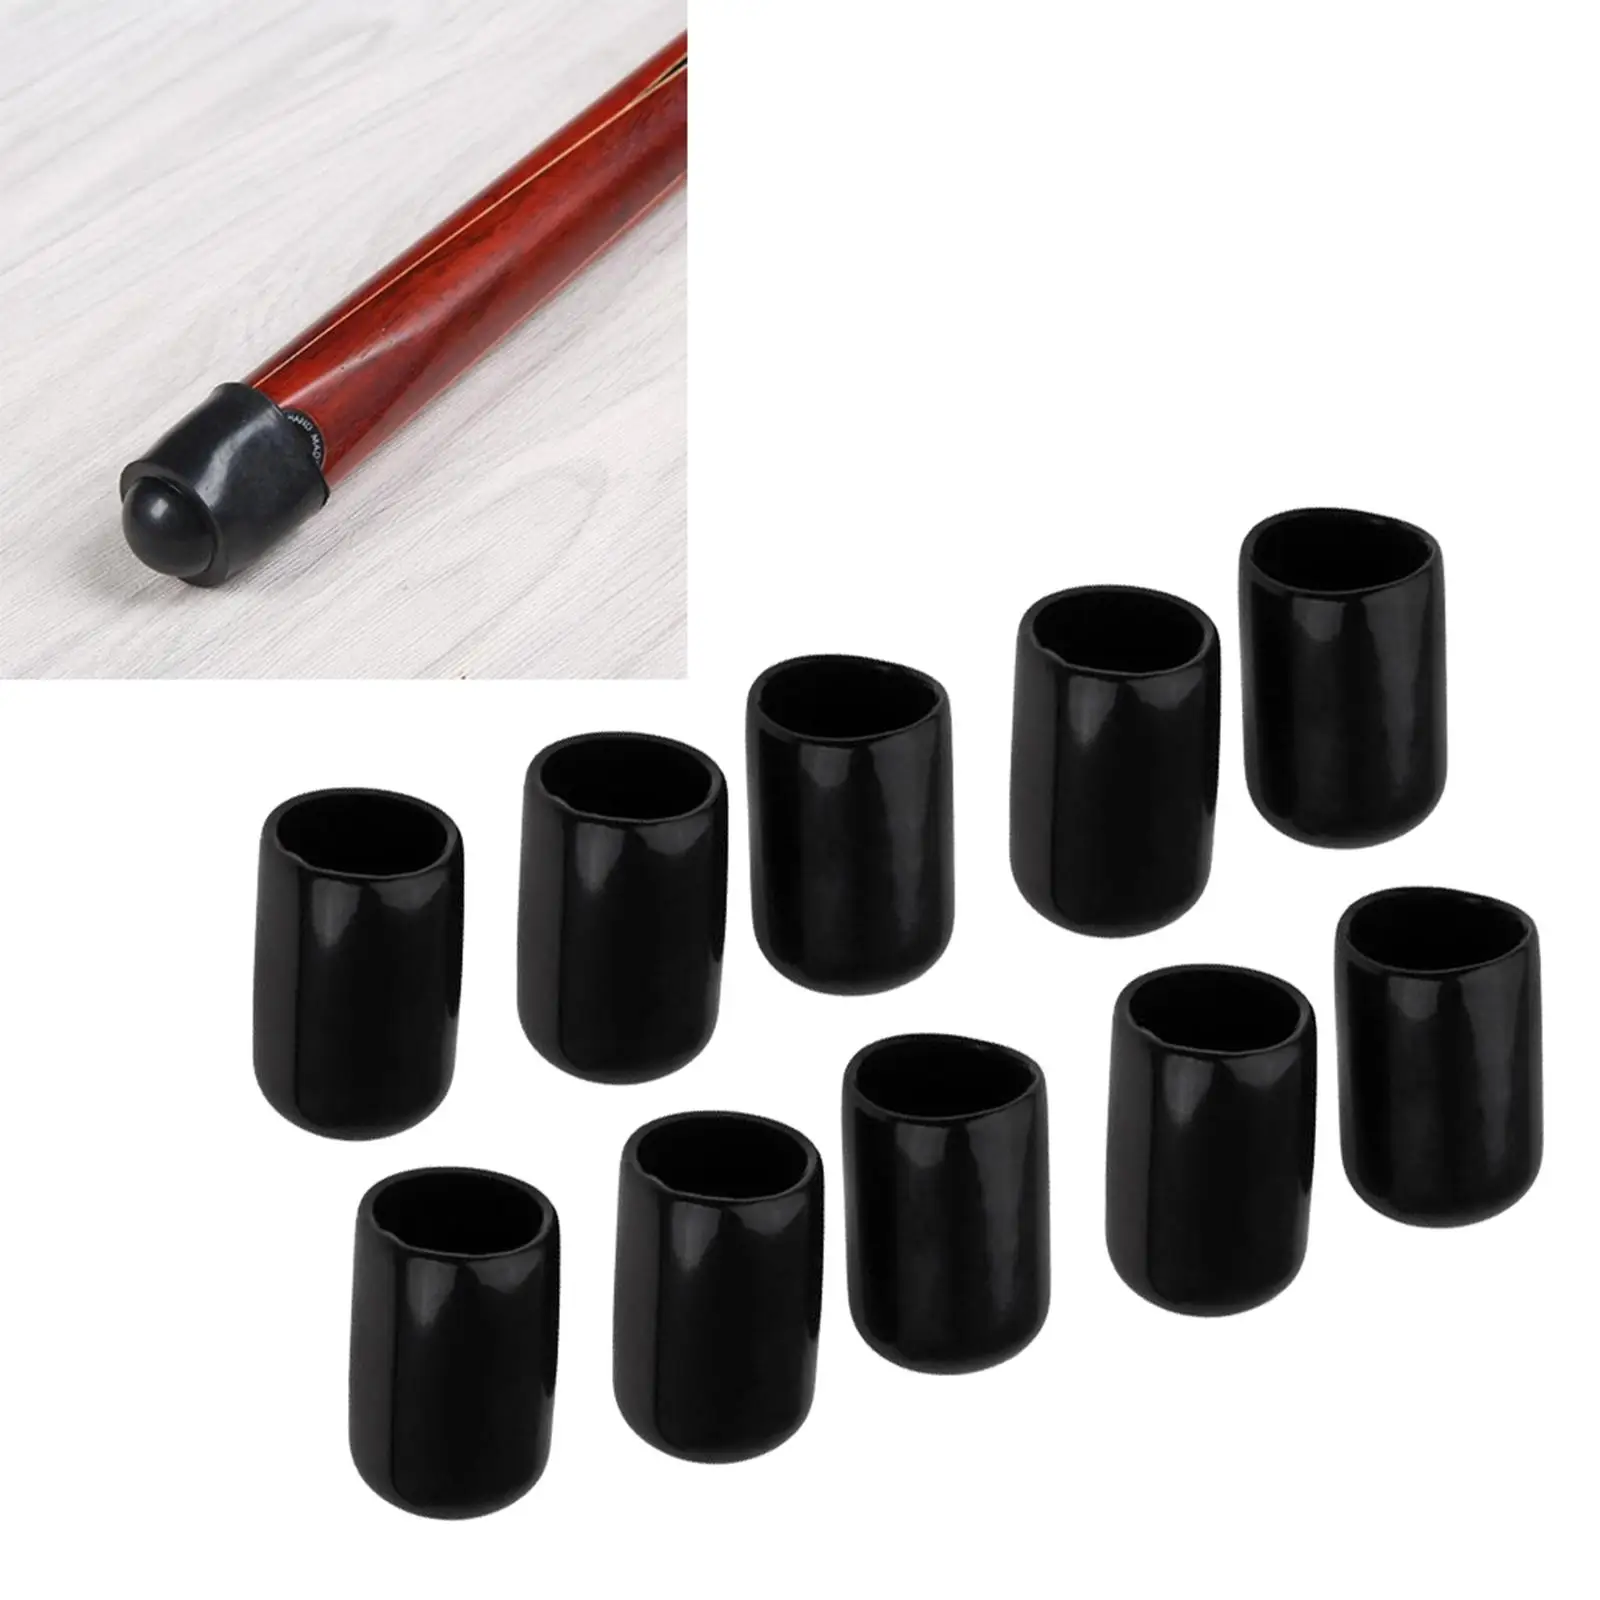 10Pcs Pool Cue Tips Hat for Snooker Cue Tips Pool Billiards Accessories